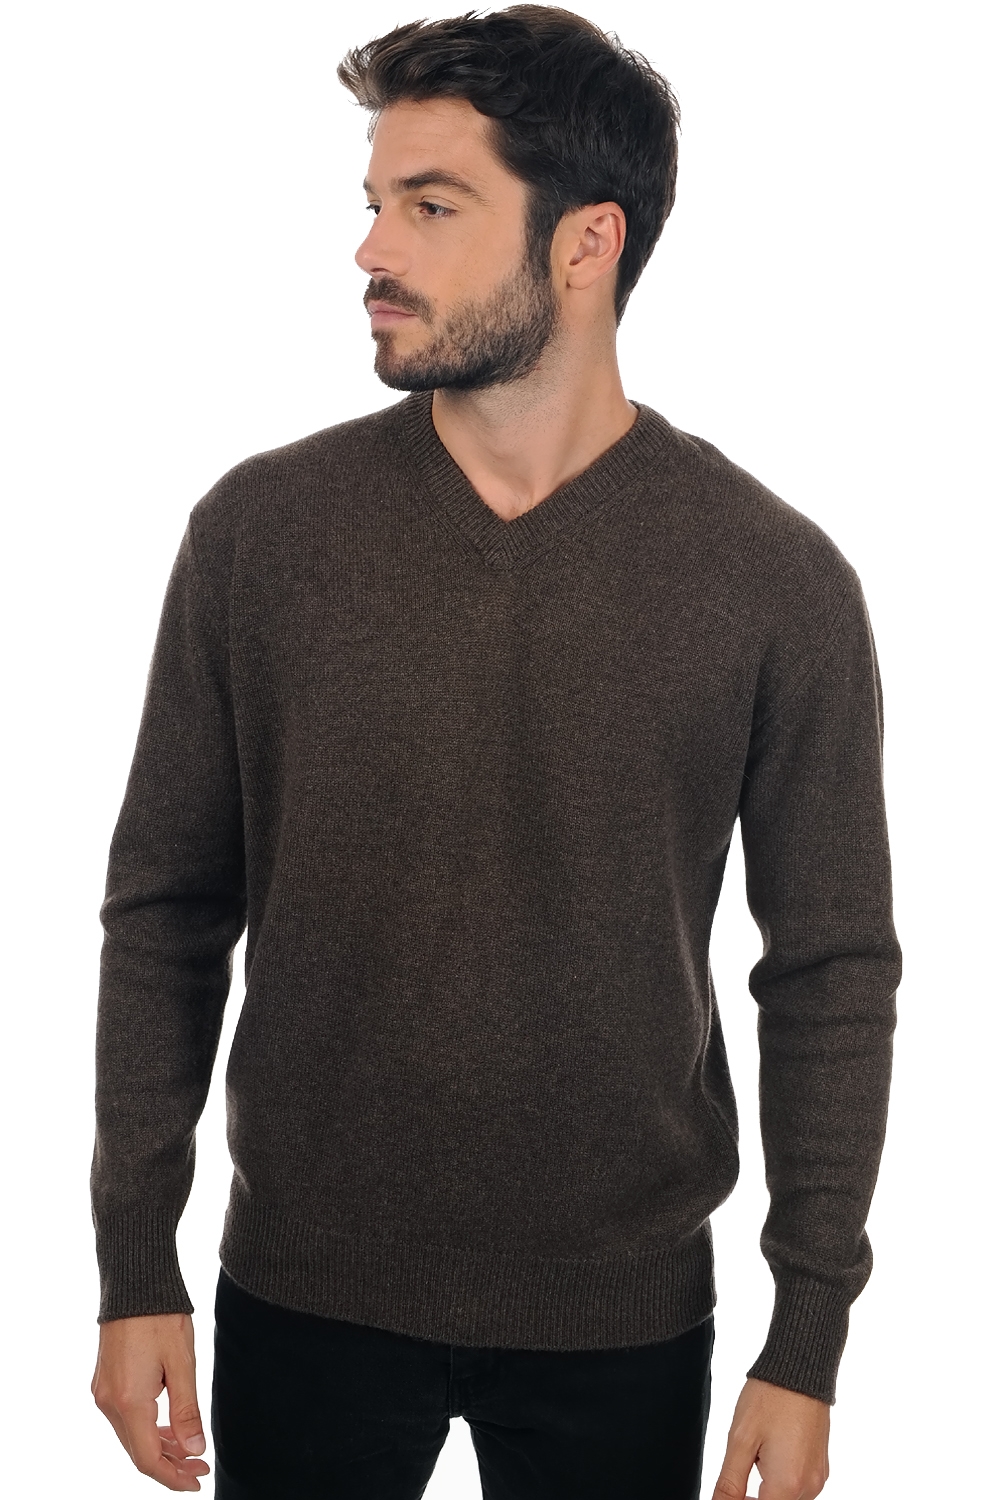 Cachemire pull homme hippolyte 4f marron chine 2xl